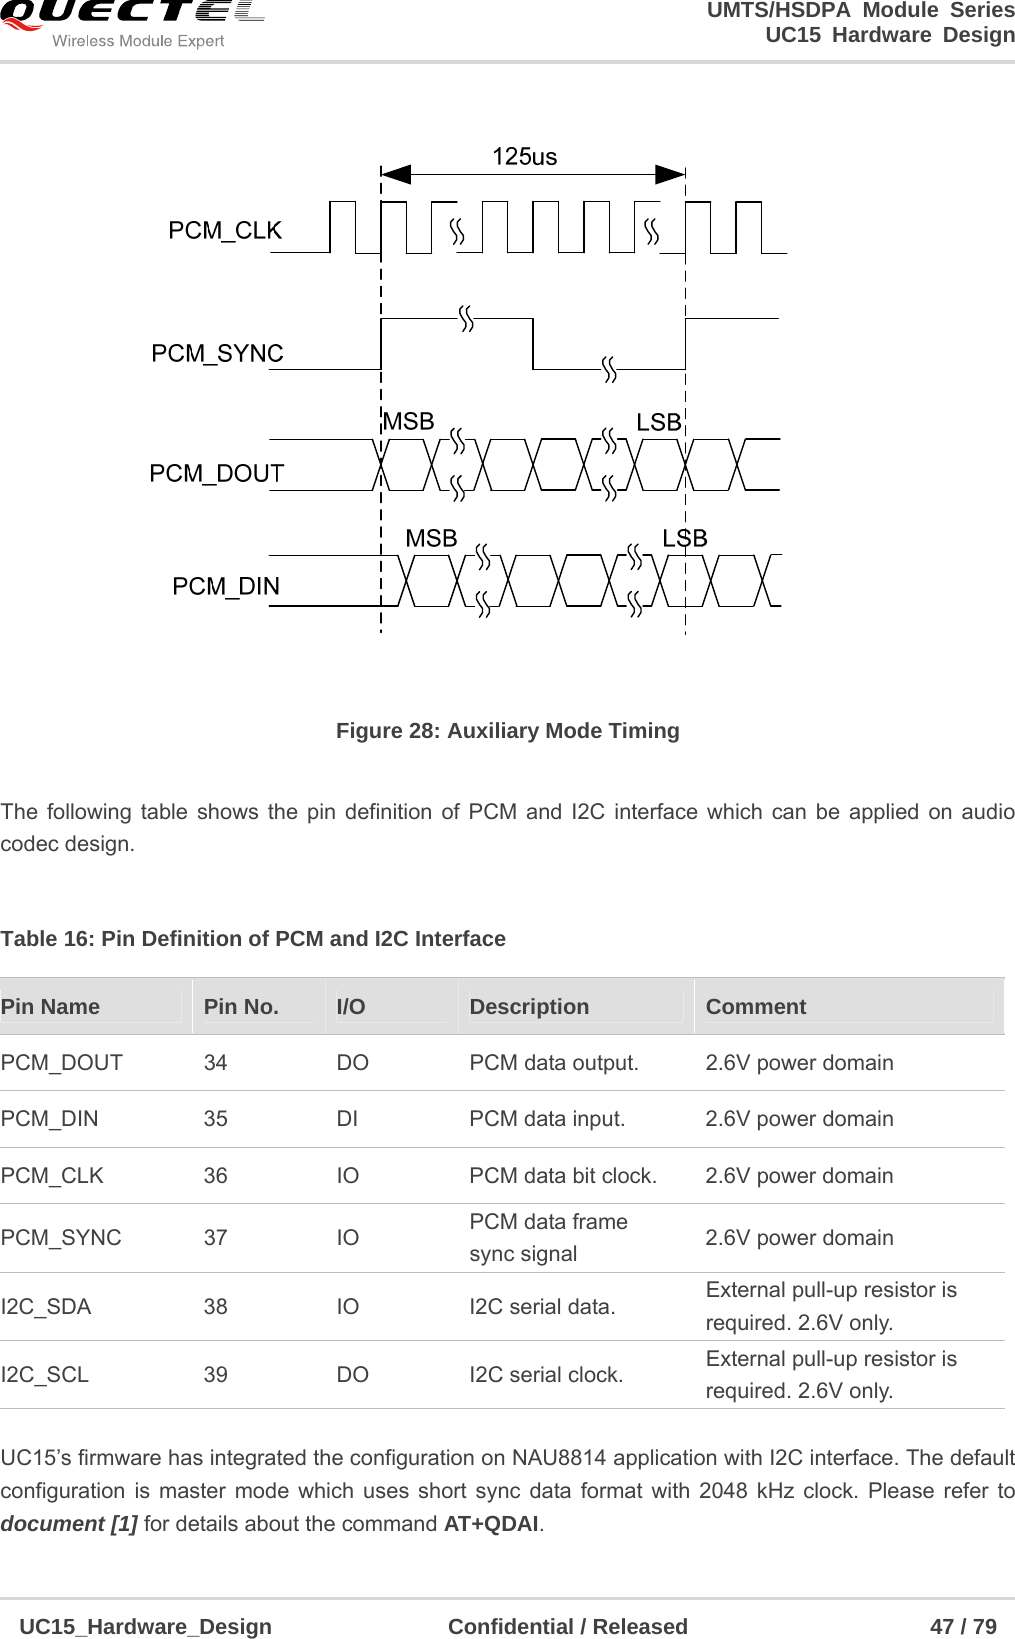                                                                        UMTS/HSDPA Module Series                                                                 UC15 Hardware Design  UC15_Hardware_Design                Confidential / Released                      47 / 79     Figure 28: Auxiliary Mode Timing  The following table shows the pin definition of PCM and I2C interface which can be applied on audio codec design.  Table 16: Pin Definition of PCM and I2C Interface  UC15’s firmware has integrated the configuration on NAU8814 application with I2C interface. The default configuration is master mode which uses short sync data format with 2048 kHz clock. Please refer to document [1] for details about the command AT+QDAI. Pin Name    Pin No.  I/O  Description   Comment PCM_DOUT  34  DO  PCM data output.  2.6V power domain PCM_DIN  35  DI  PCM data input.  2.6V power domain PCM_CLK  36  IO  PCM data bit clock.  2.6V power domain PCM_SYNC 37  IO  PCM data frame   sync signal  2.6V power domain I2C_SDA  38  IO  I2C serial data.  External pull-up resistor is required. 2.6V only. I2C_SCL  39  DO  I2C serial clock.  External pull-up resistor is required. 2.6V only. 